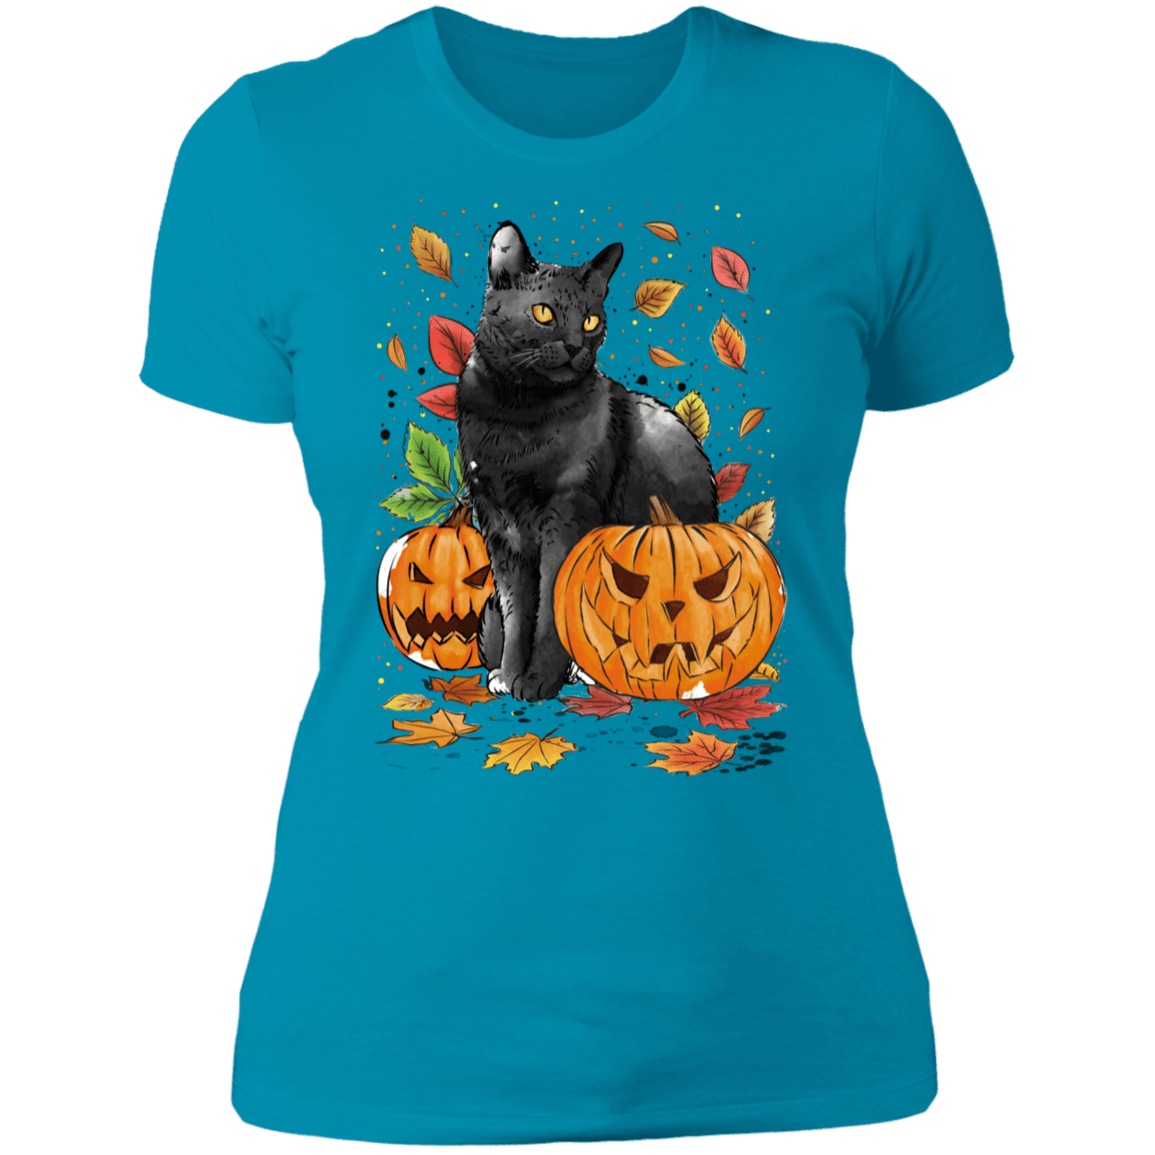 T-Shirts Turquoise / S Cat Leaves and Pumpkins Women's Premium T-Shirt